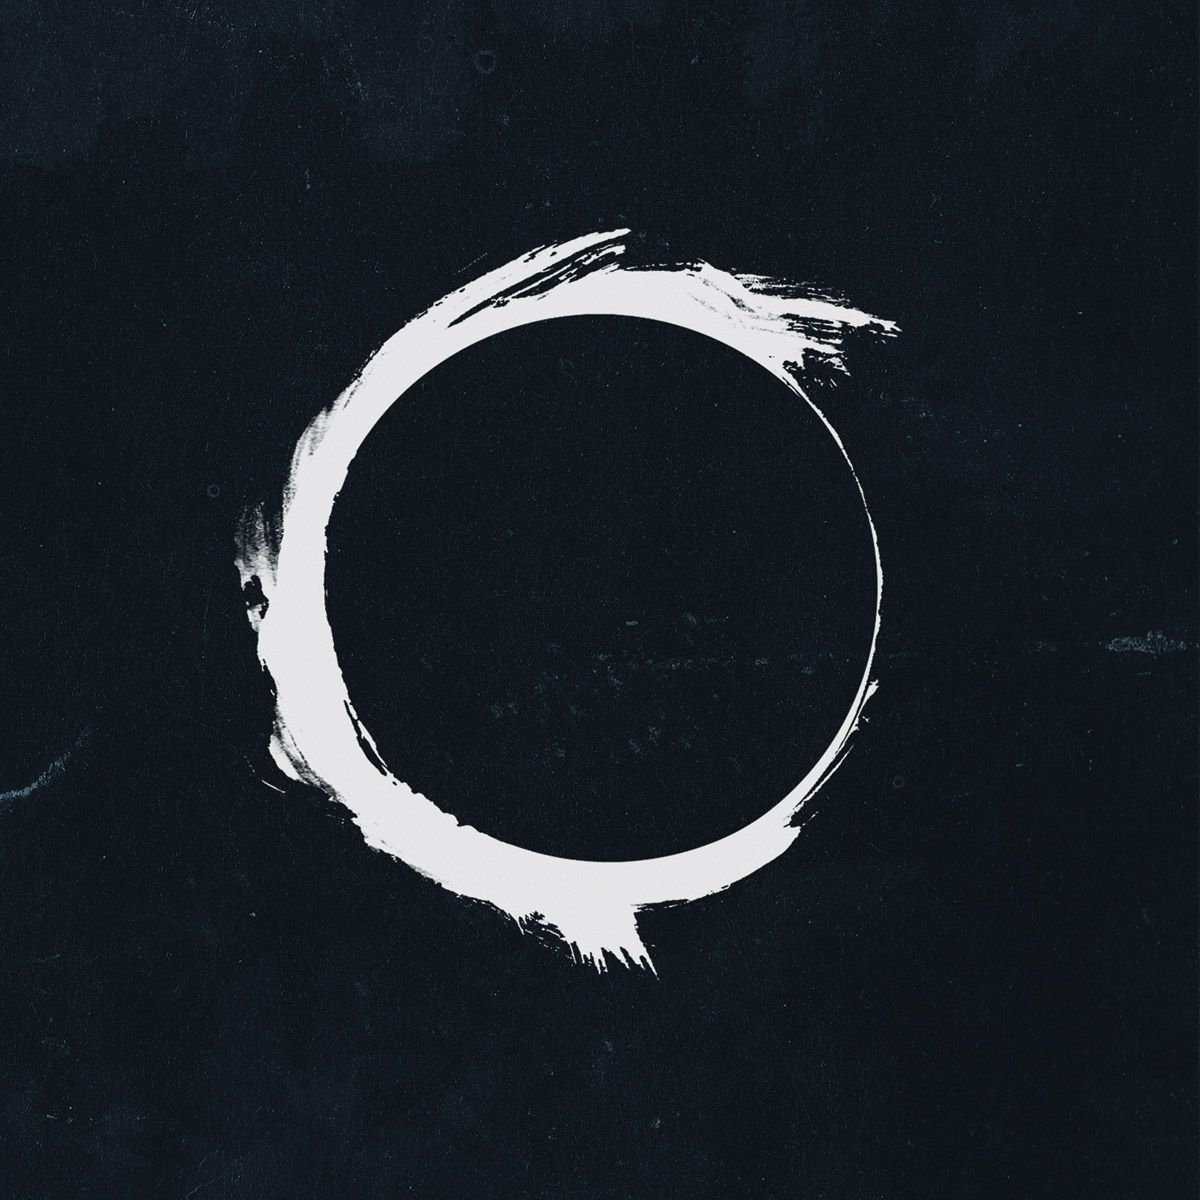 and they have escaped the weight of darkness | Ólafur Arnalds